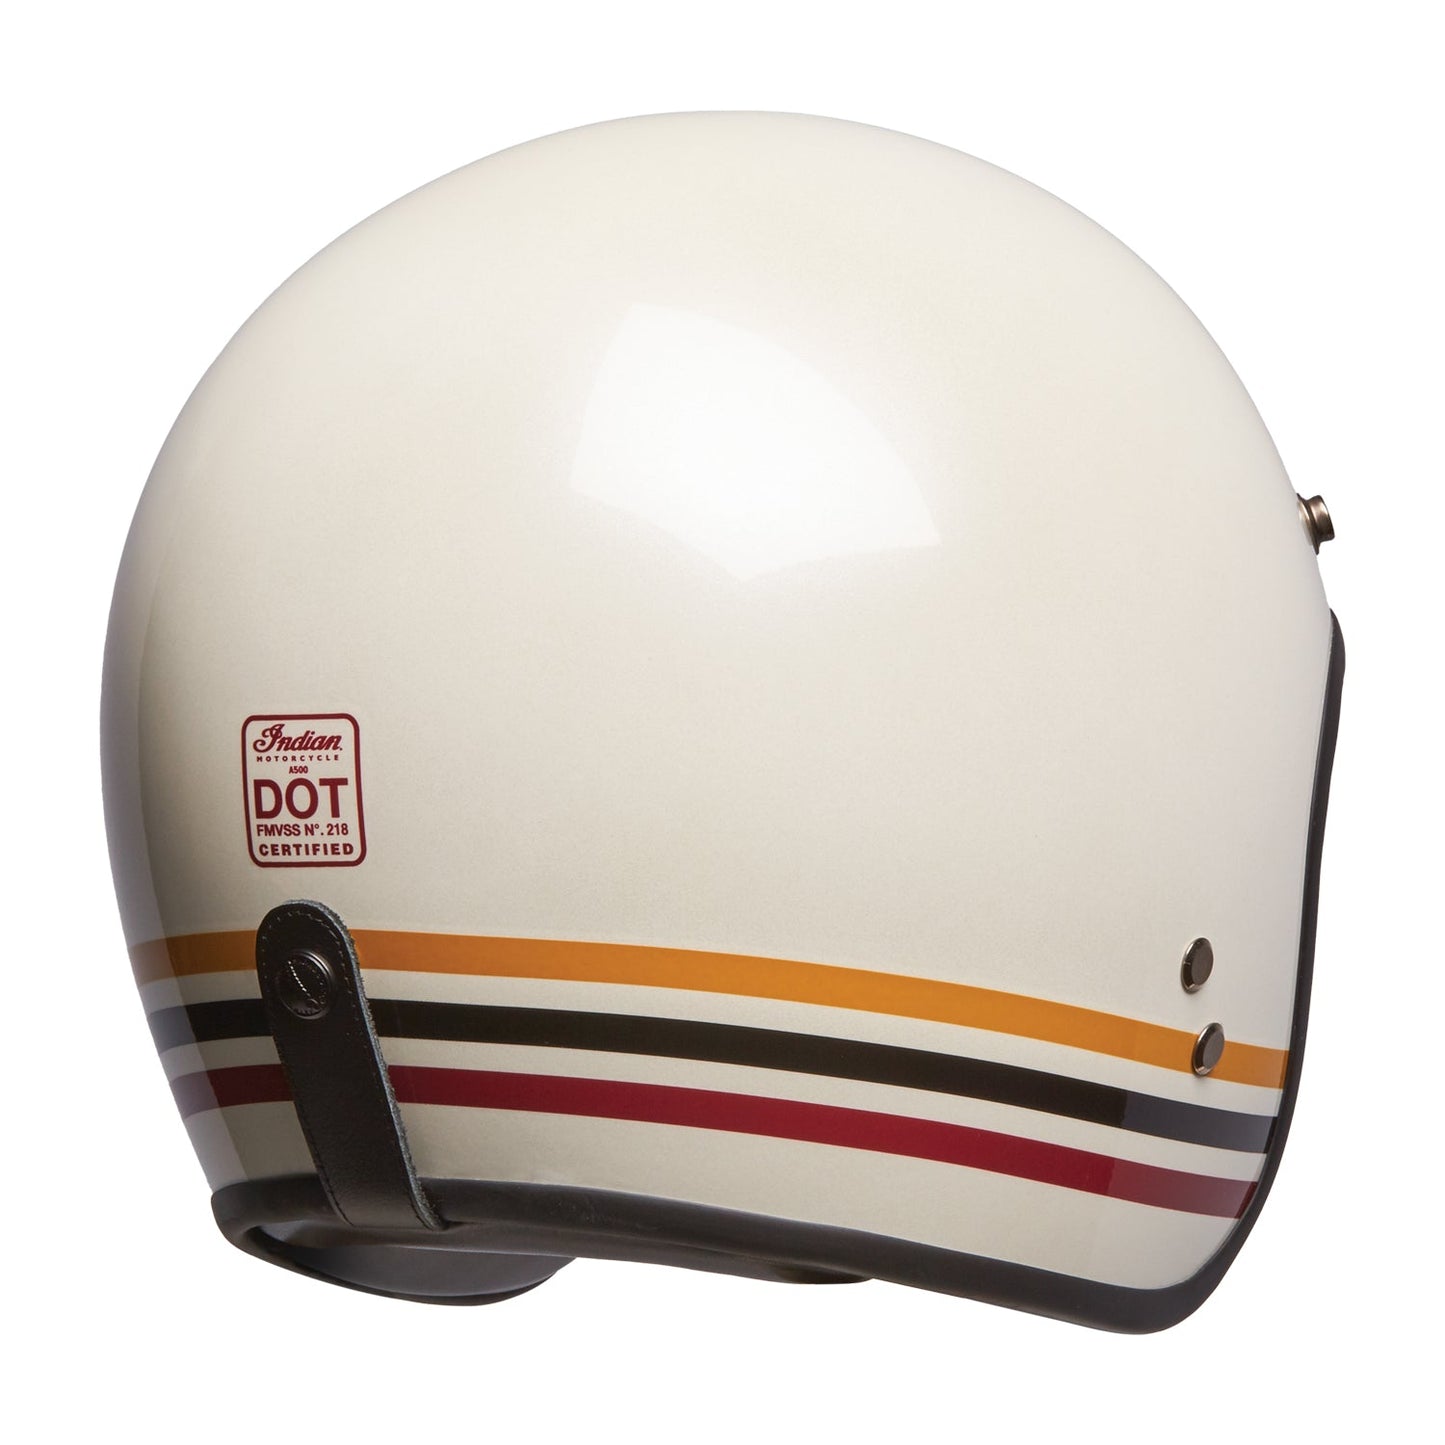 Open Face Retro Helmet with Stripes, White by Indian MotorcycleÂ®